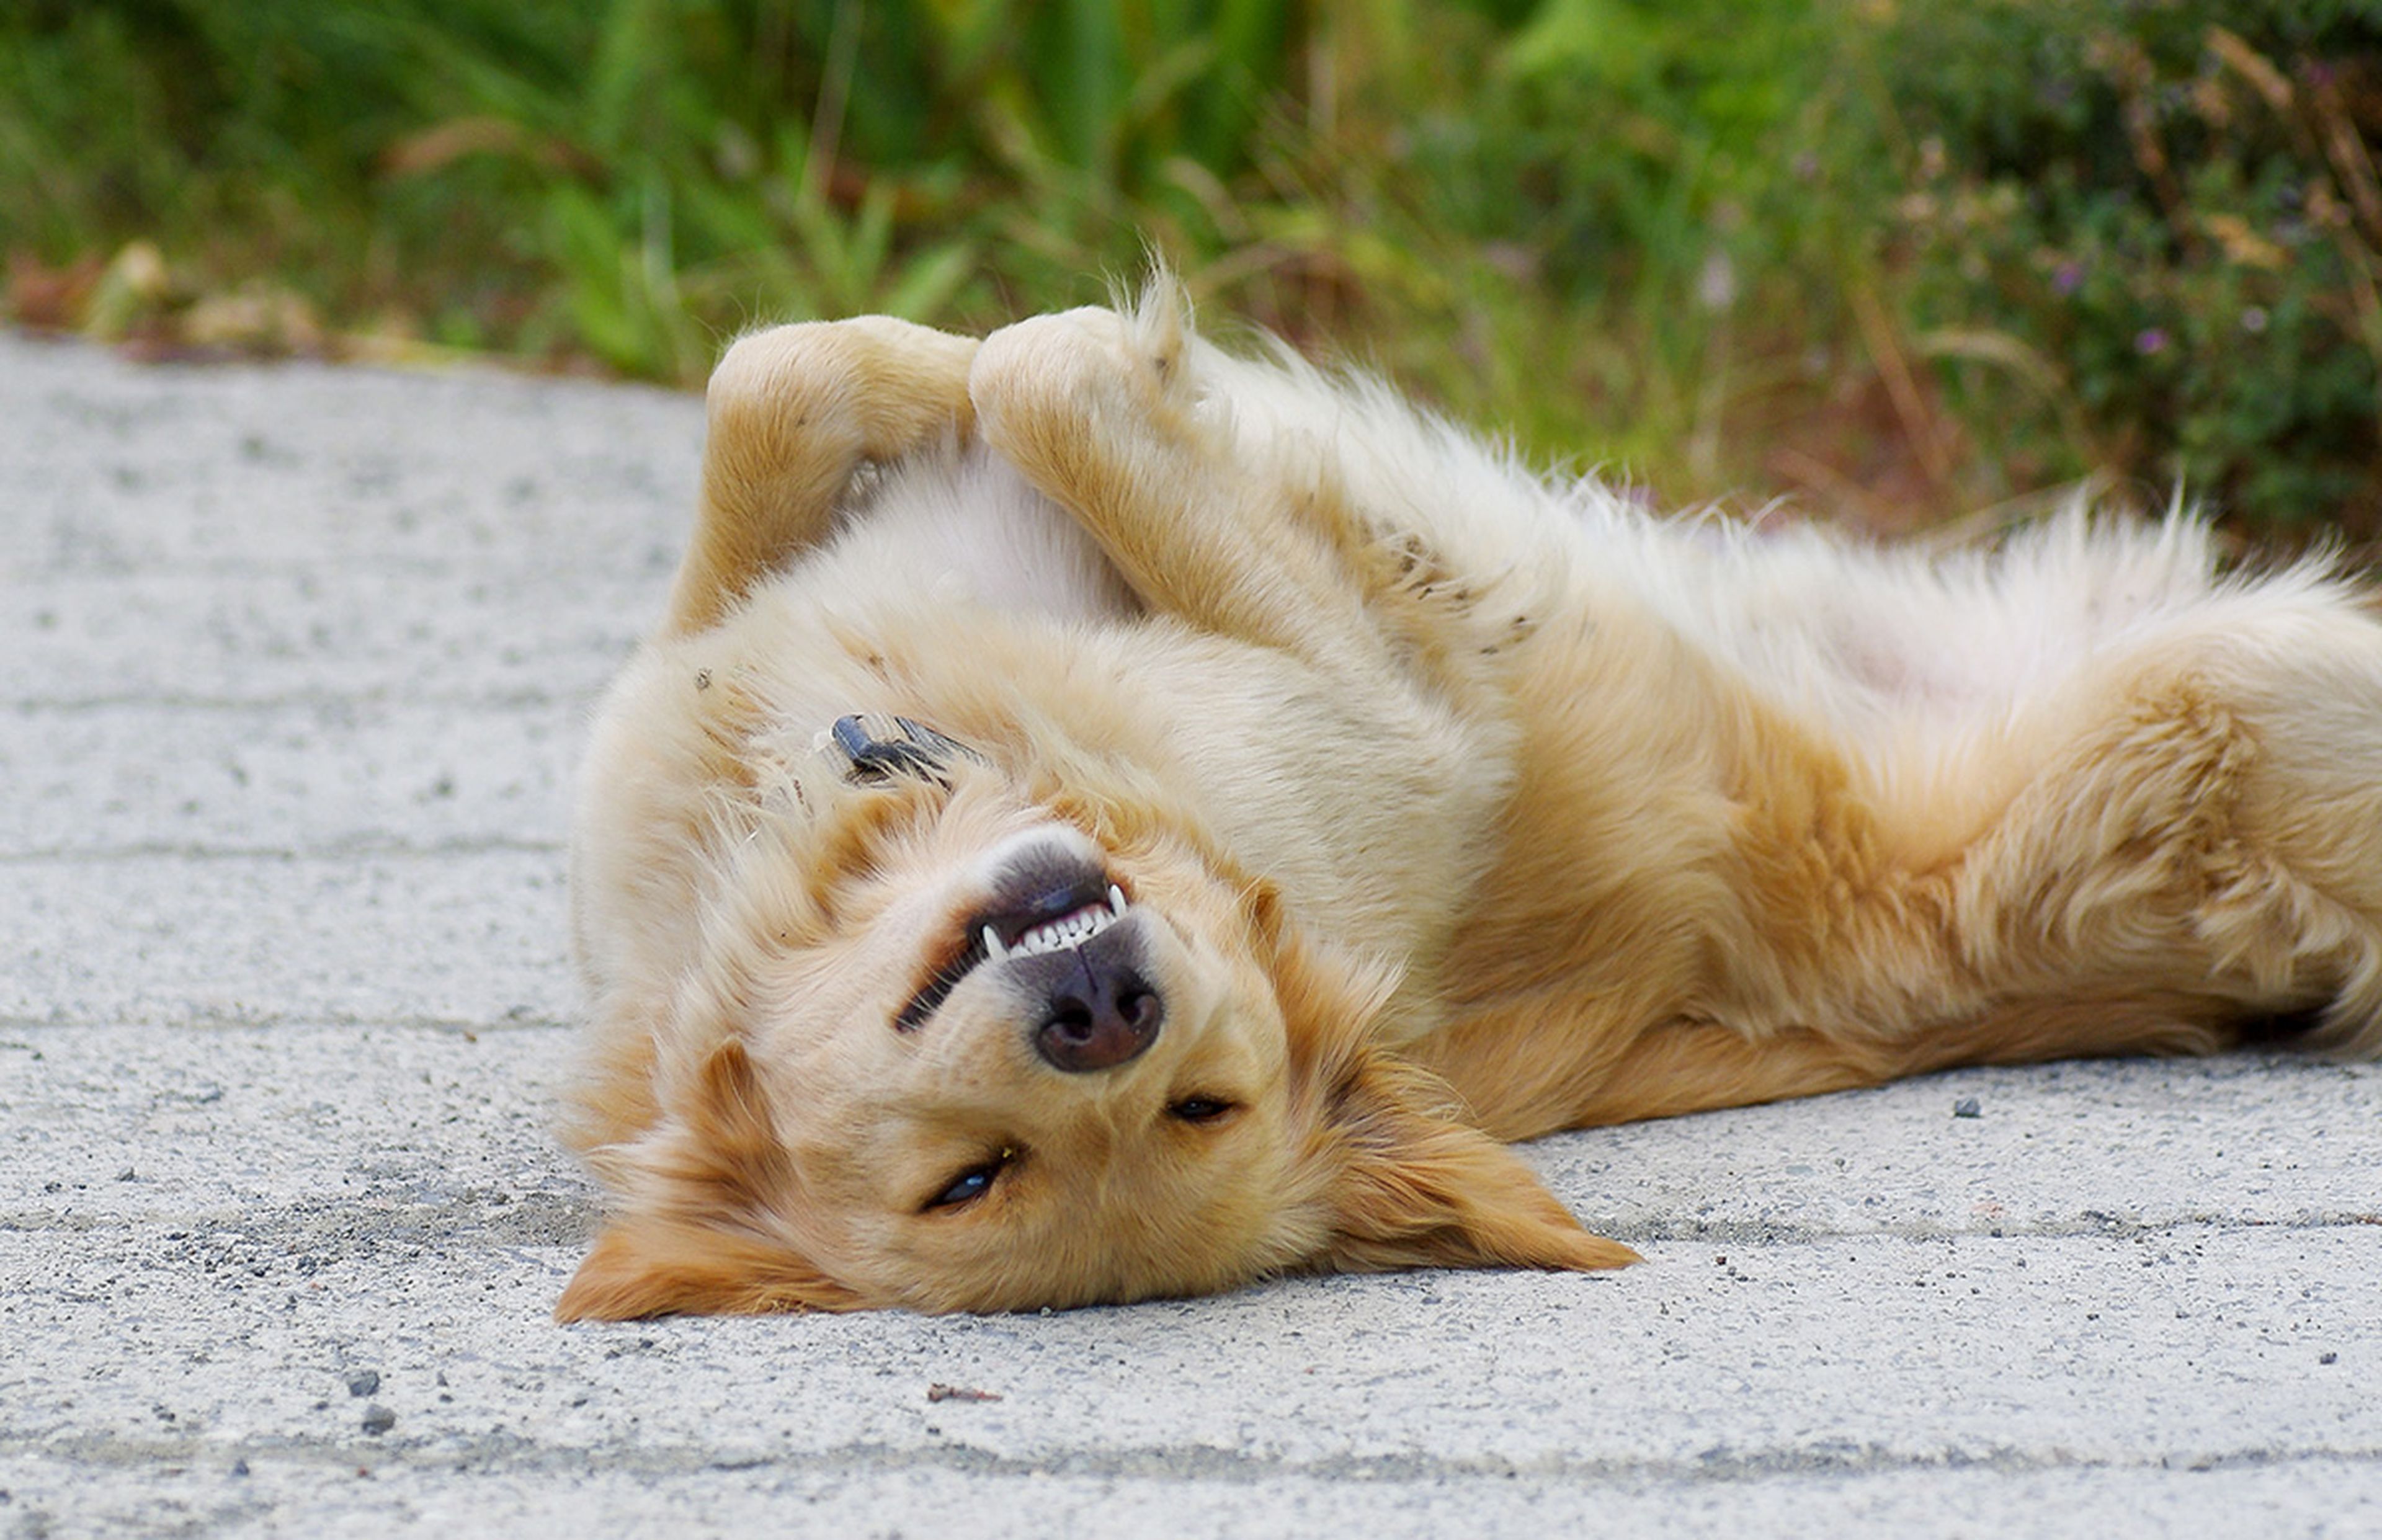 A playful golden retriever laying on a concrete floor.